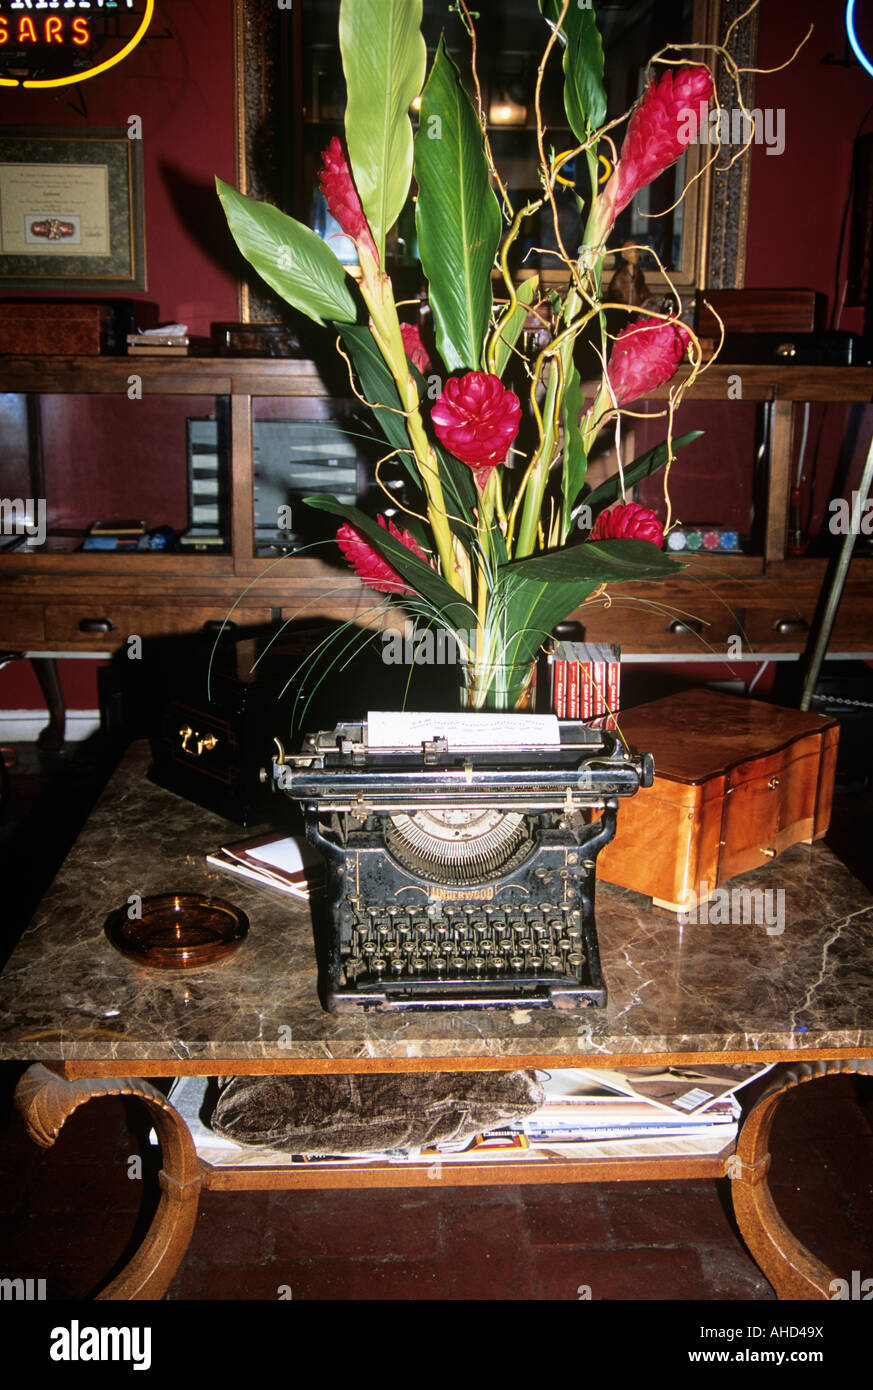 Antique typewriter on display in an antique shop, French Quarter, New Orleans, Louisiana, USA Stock Photo